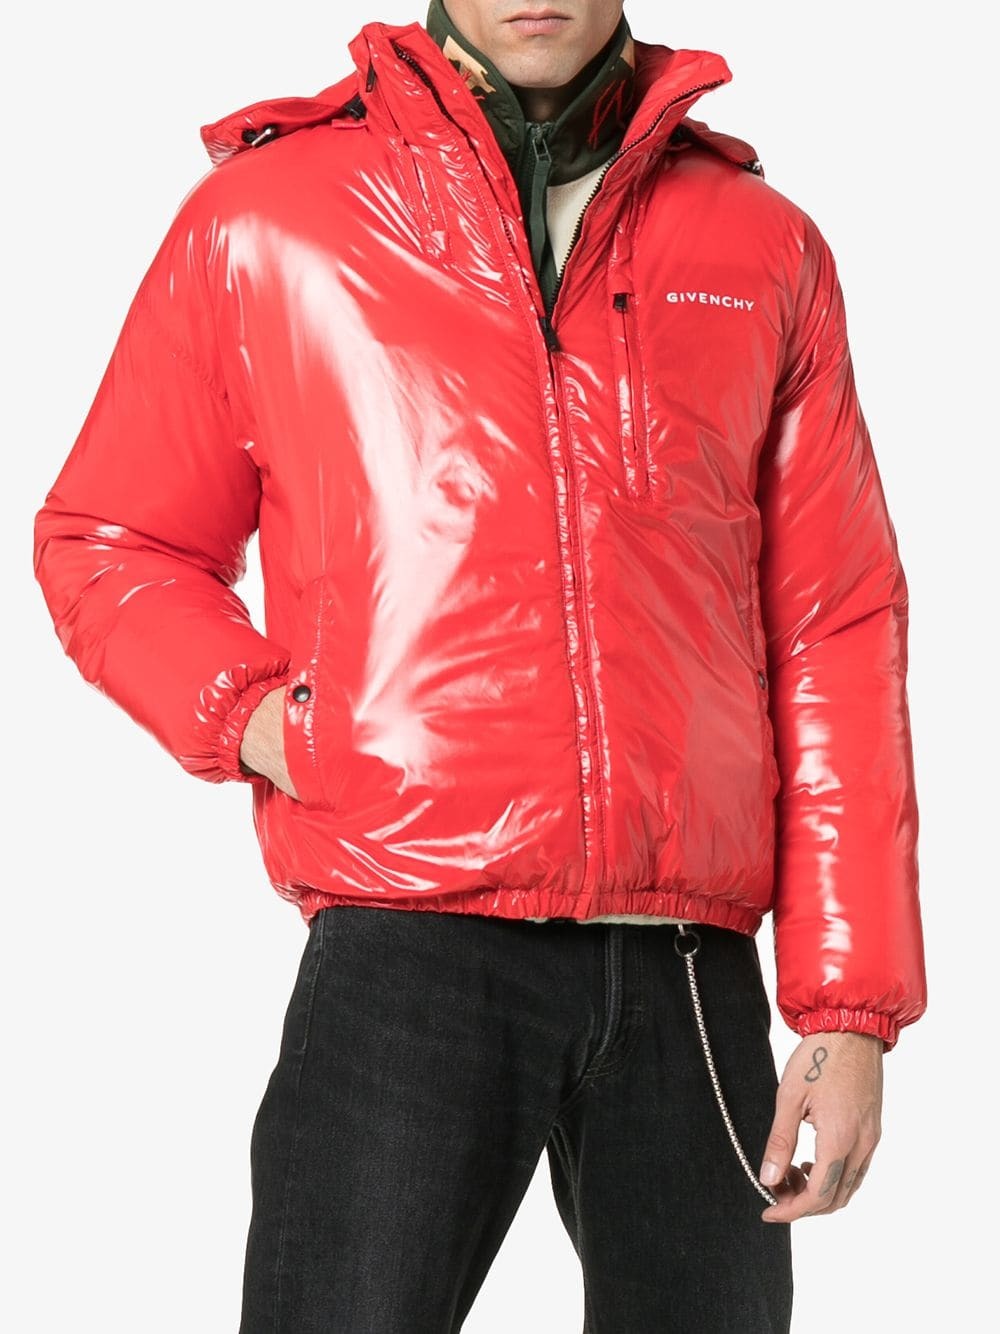 Givenchy High Shine Hooded Puffer Jacket, $1,677  | Lookastic